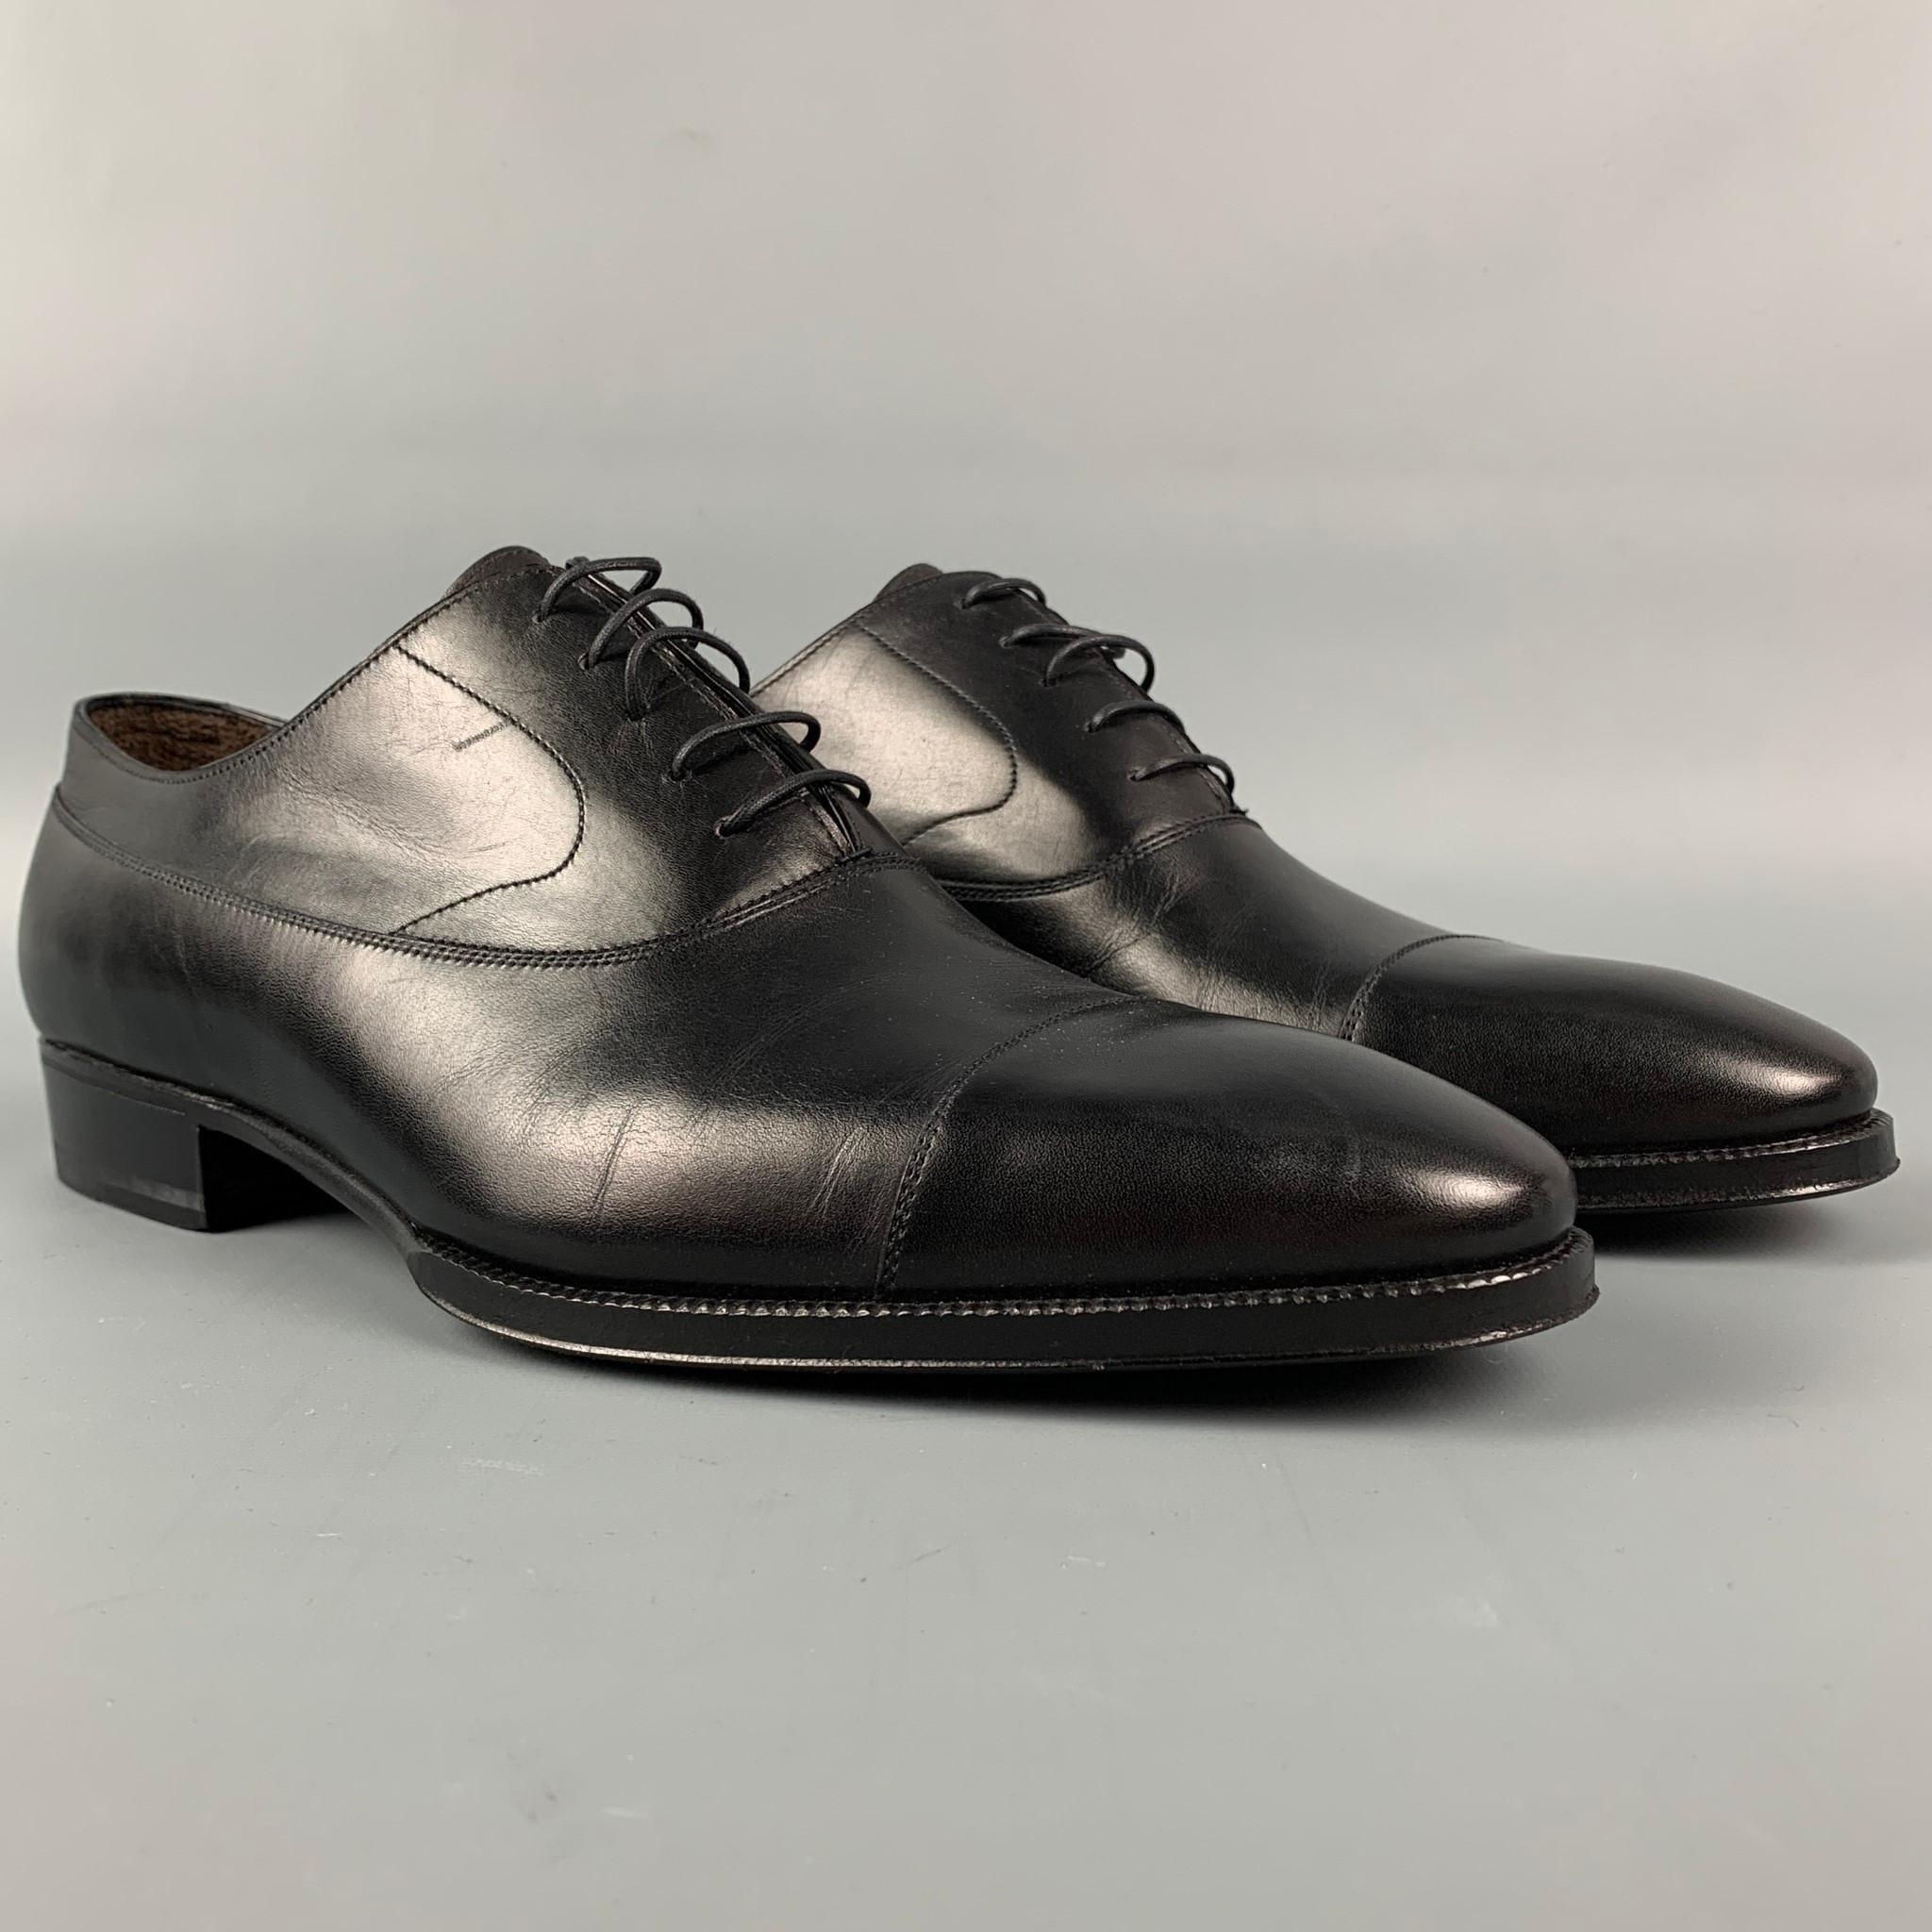 BRIONI shoes comes in a black leather featuring a cap toe and a lace up closure. Made in Italy. Retail $1225

New With Box. 
Marked: 8

Outsole: 11.5 in. x 4 in. 

SKU: 111295
Category: Lace Up Shoes

More Details
Brand: BRIONI
Size: 9
Color: